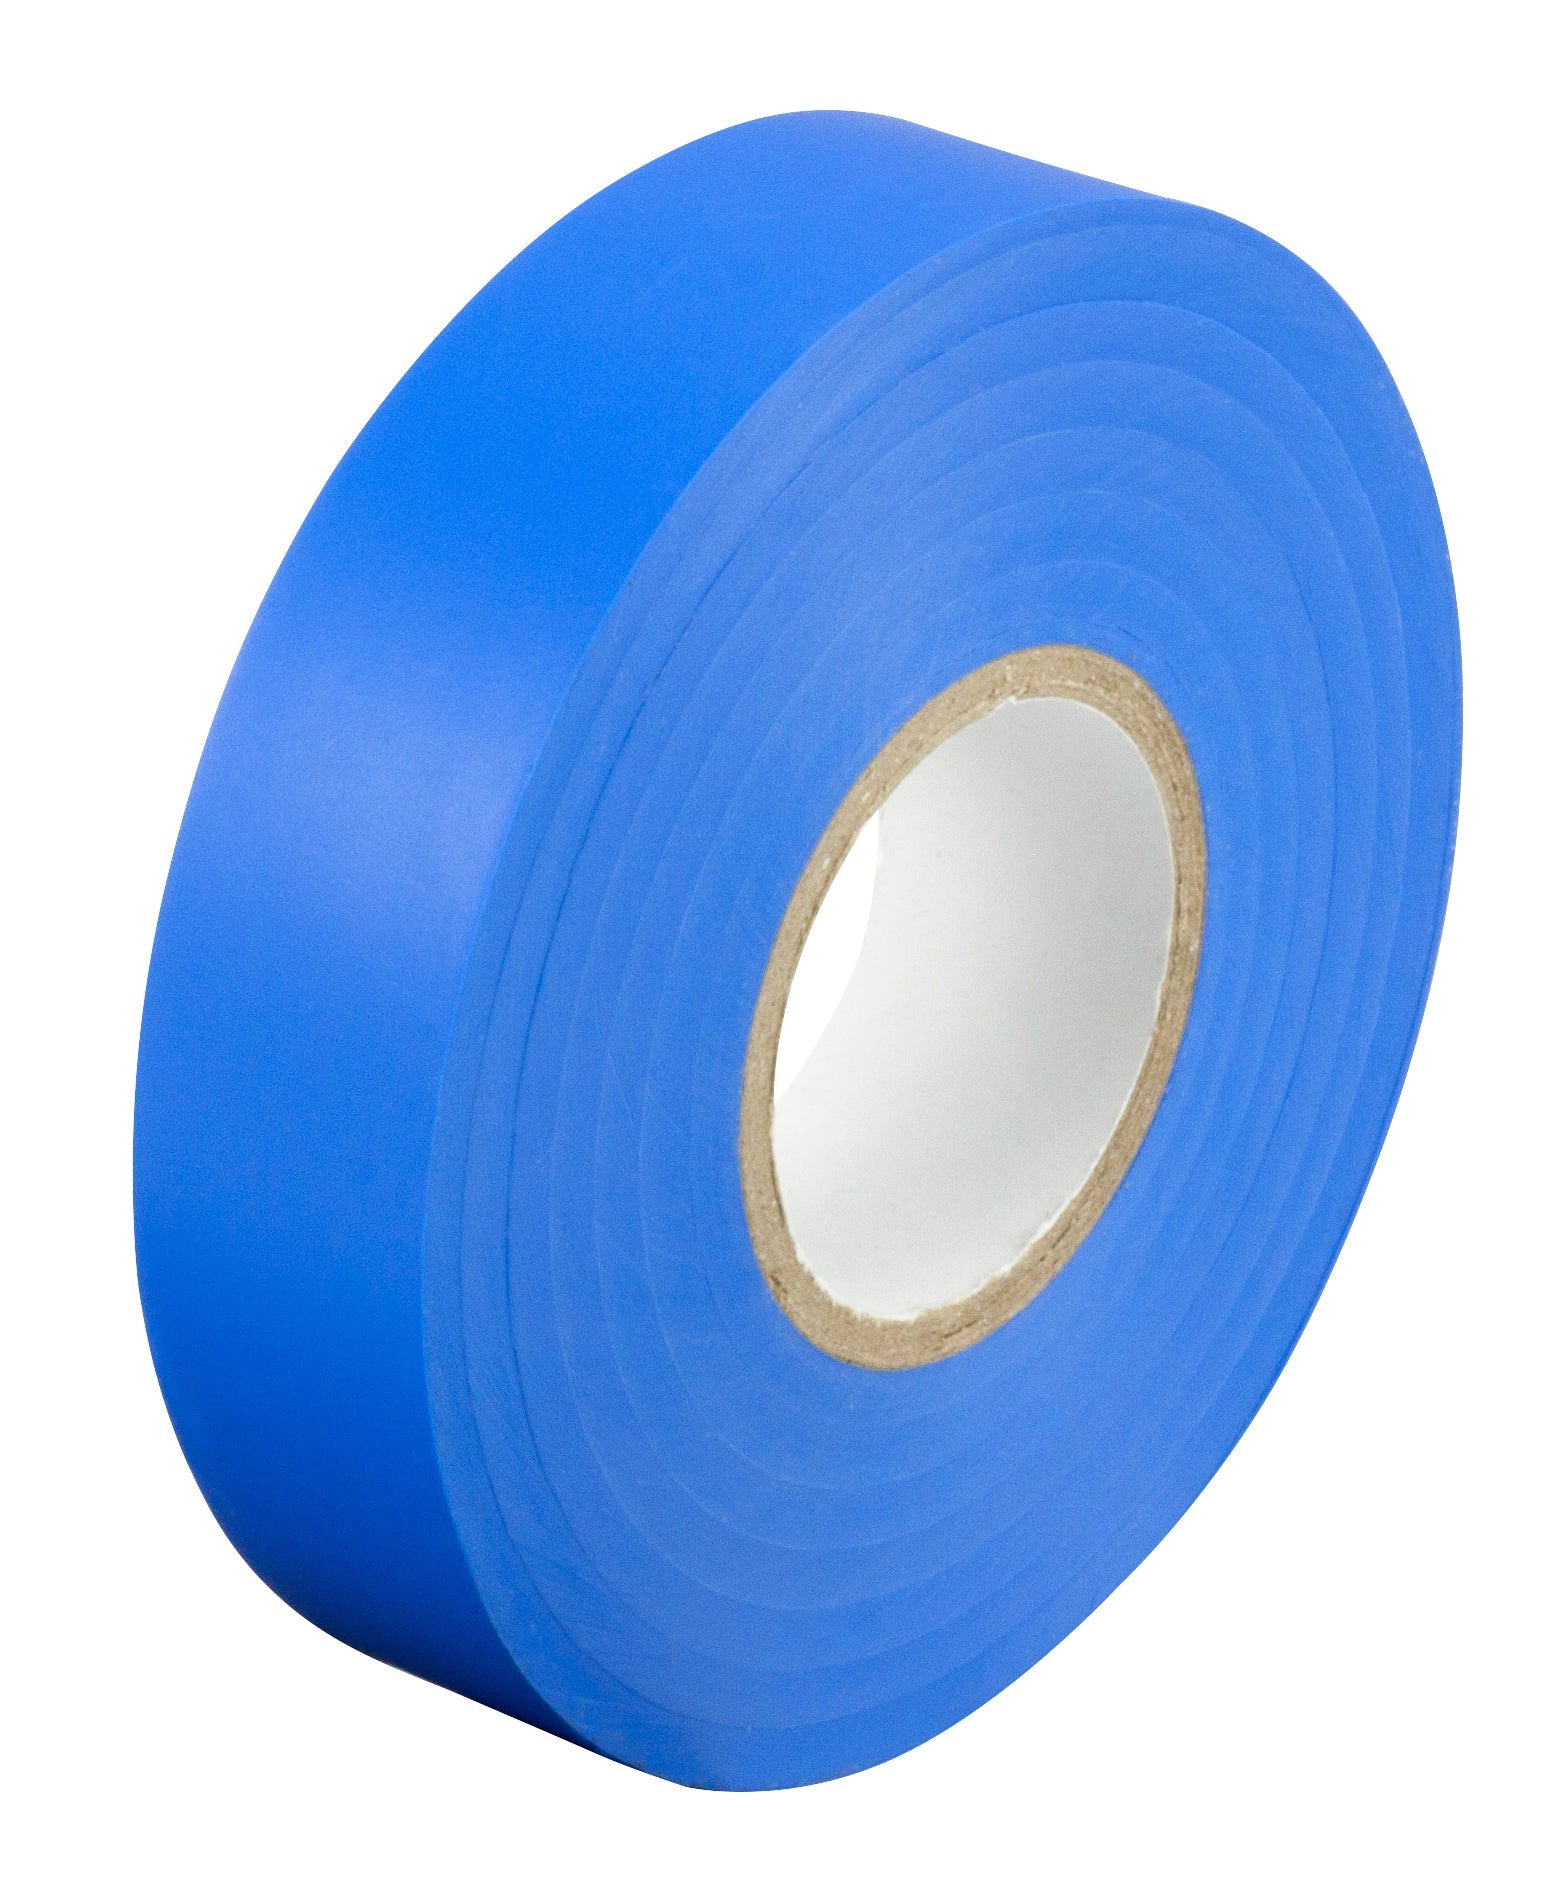 PVC Tape Size: 19mmx33m Roll - Blue - Pack of 10